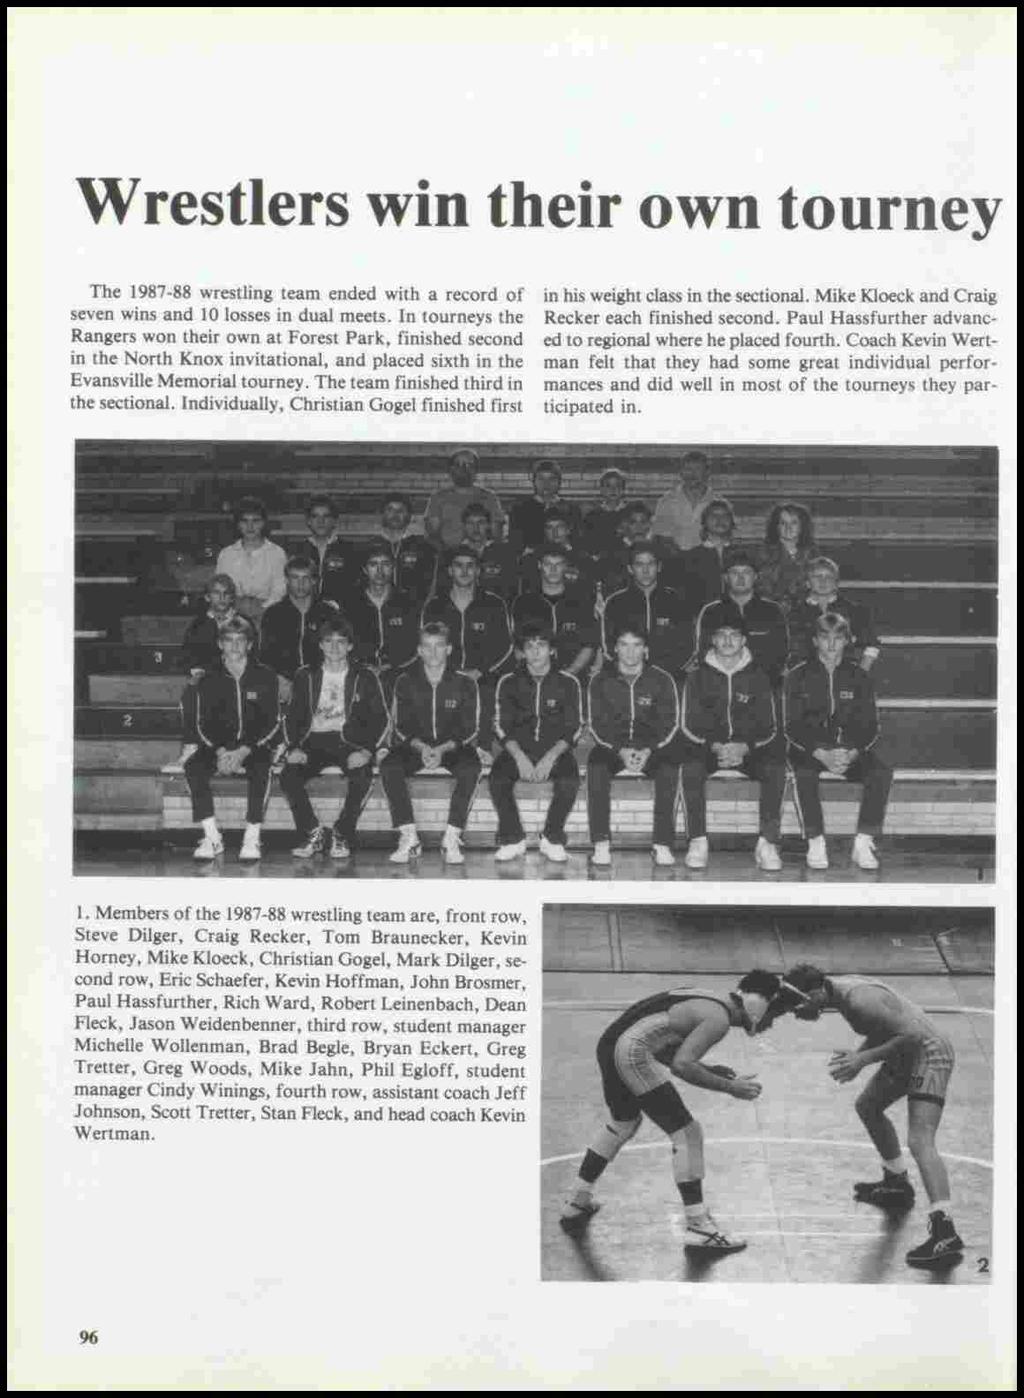 Wrestlers win their own tourney The 1987-88 wrestling team ended with a record of seven wins and 10 losses in dual meets.